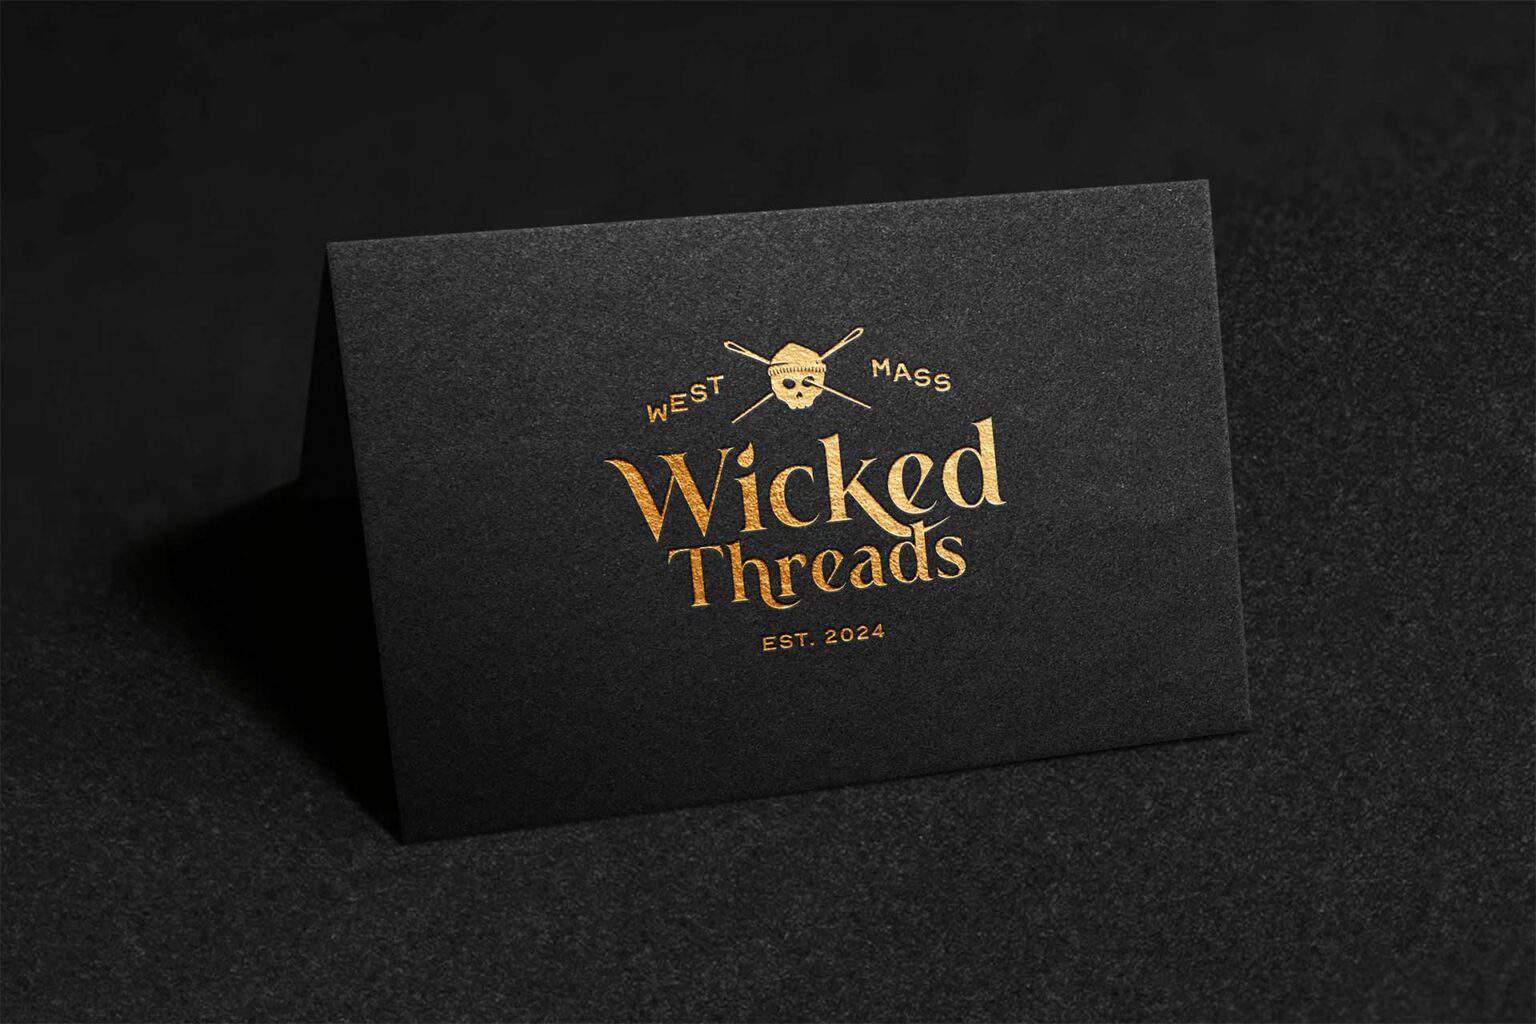 Wicked Threads logo on a black business card